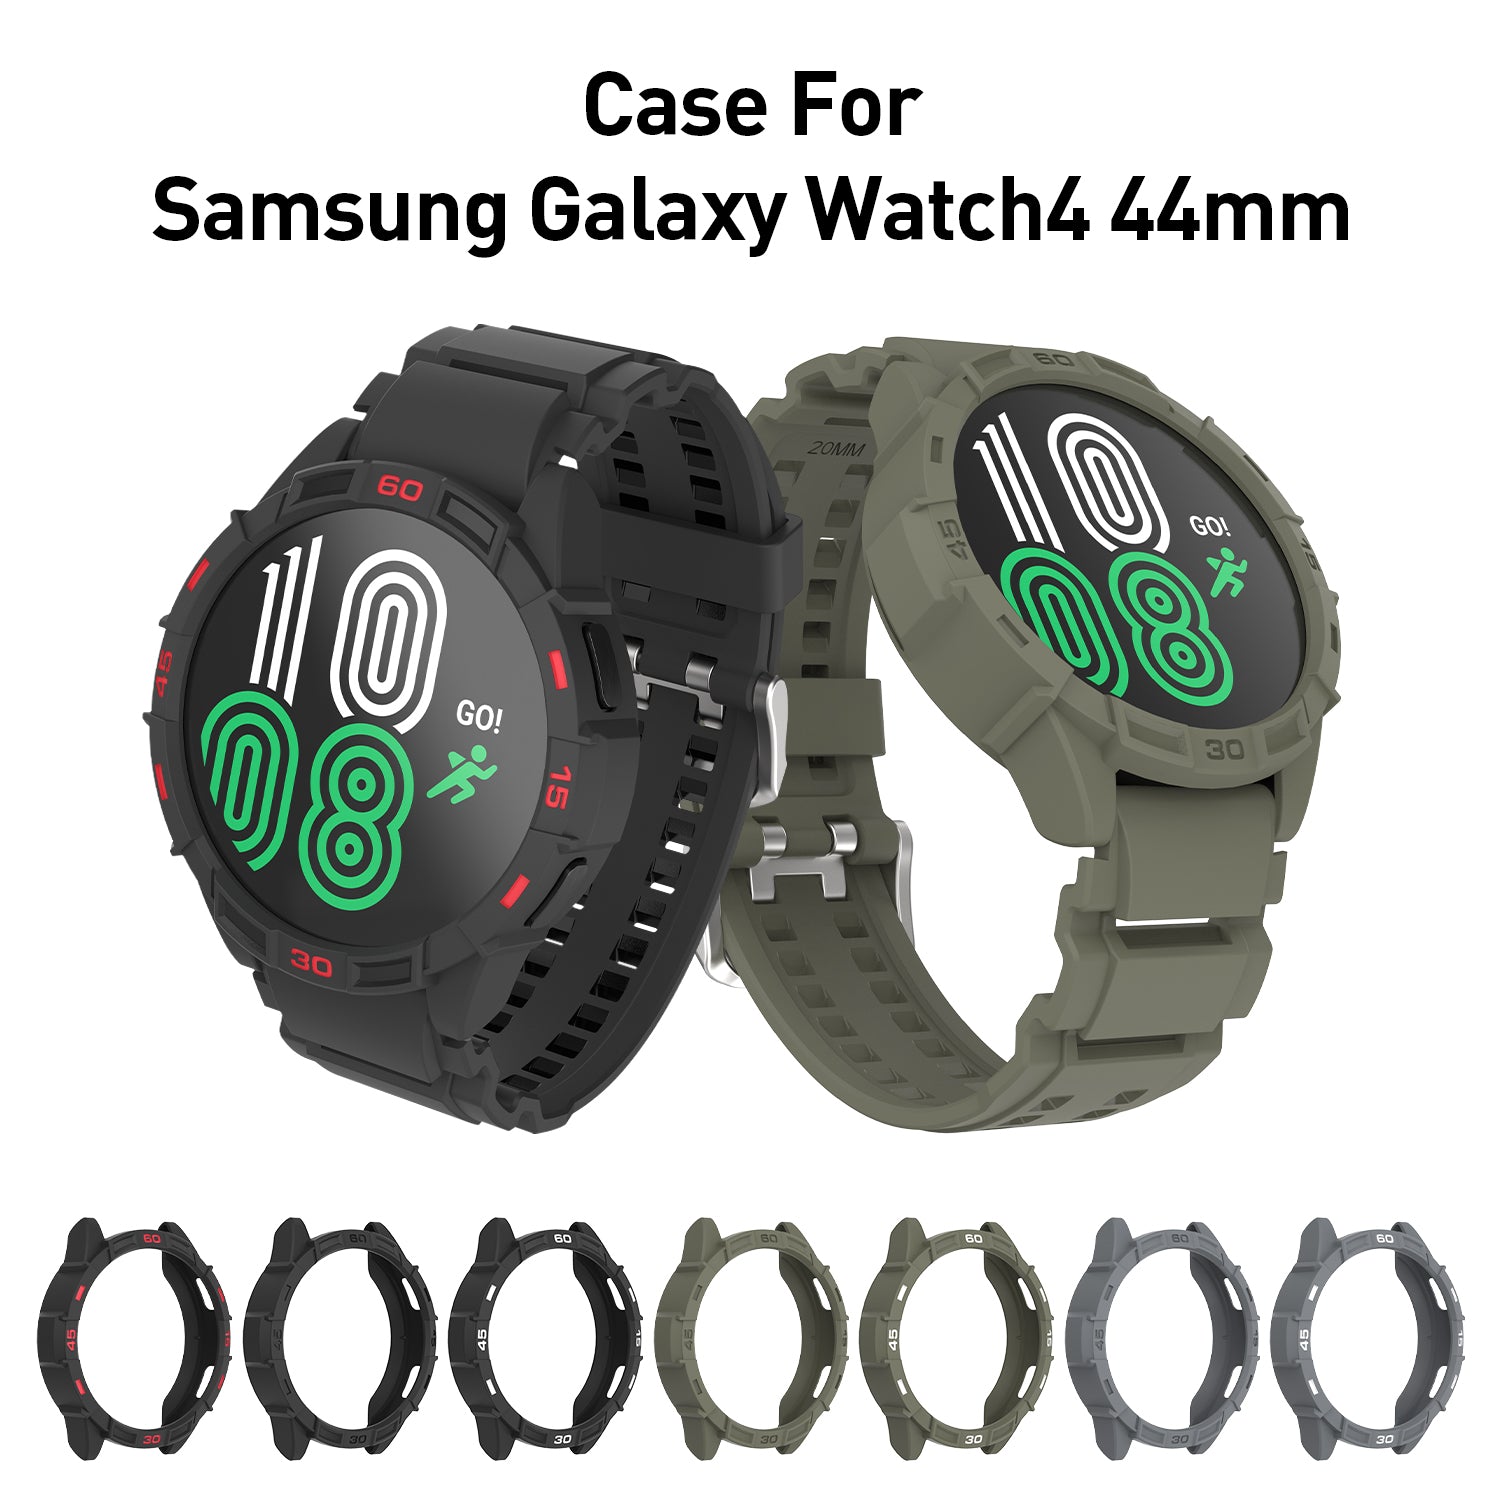 Sikai Multi-color Watch Case for Samsung Galaxy Watch 4 44mm Protective Cover with Strap for Samsung Galaxy Watch 4 SIKAI CASE